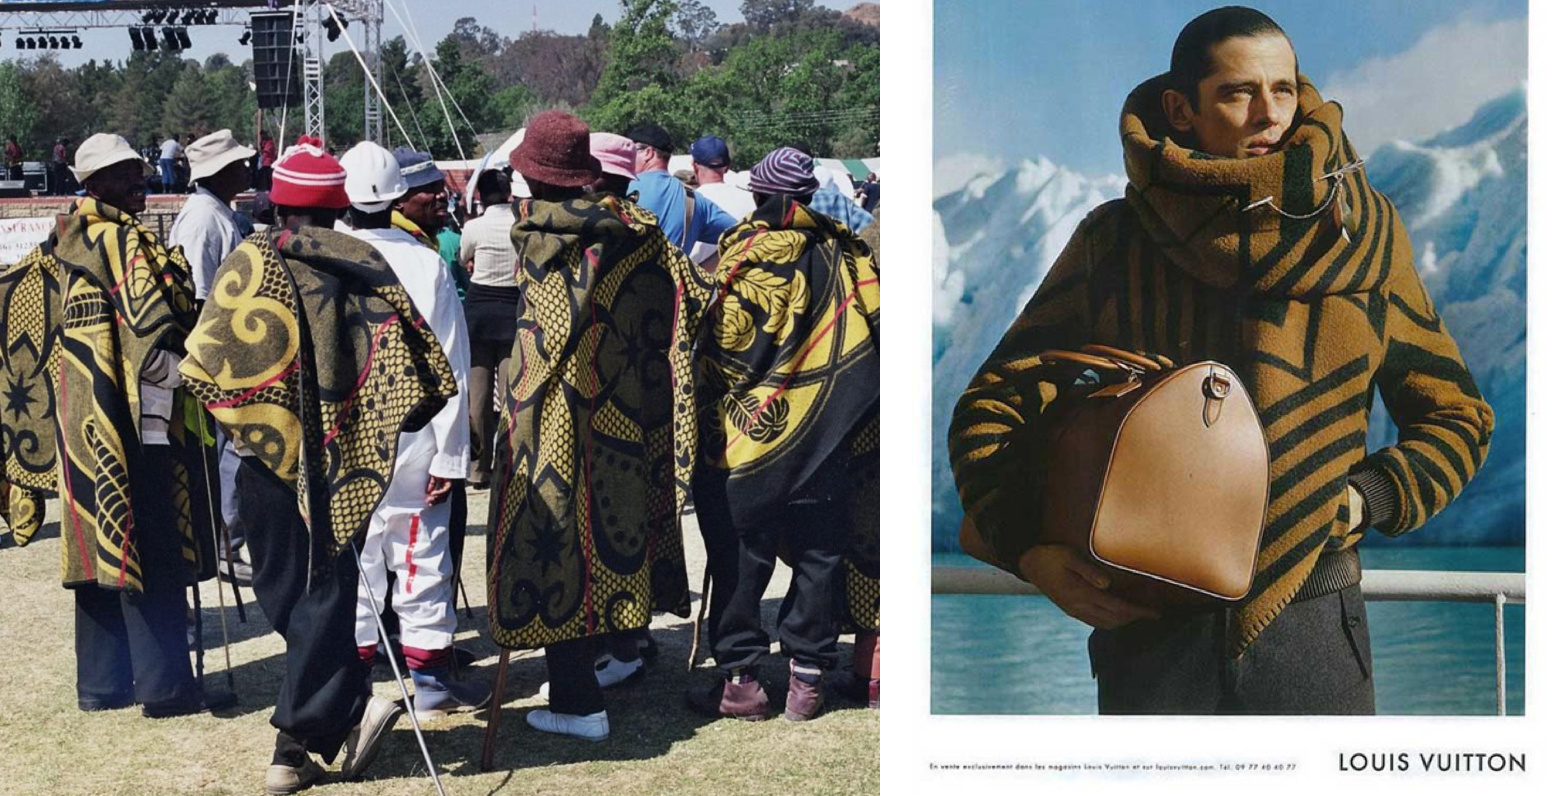 UPDATED: The Tanzania People That Have Been Copied by DVF, Land Rover &  More - The Fashion Law